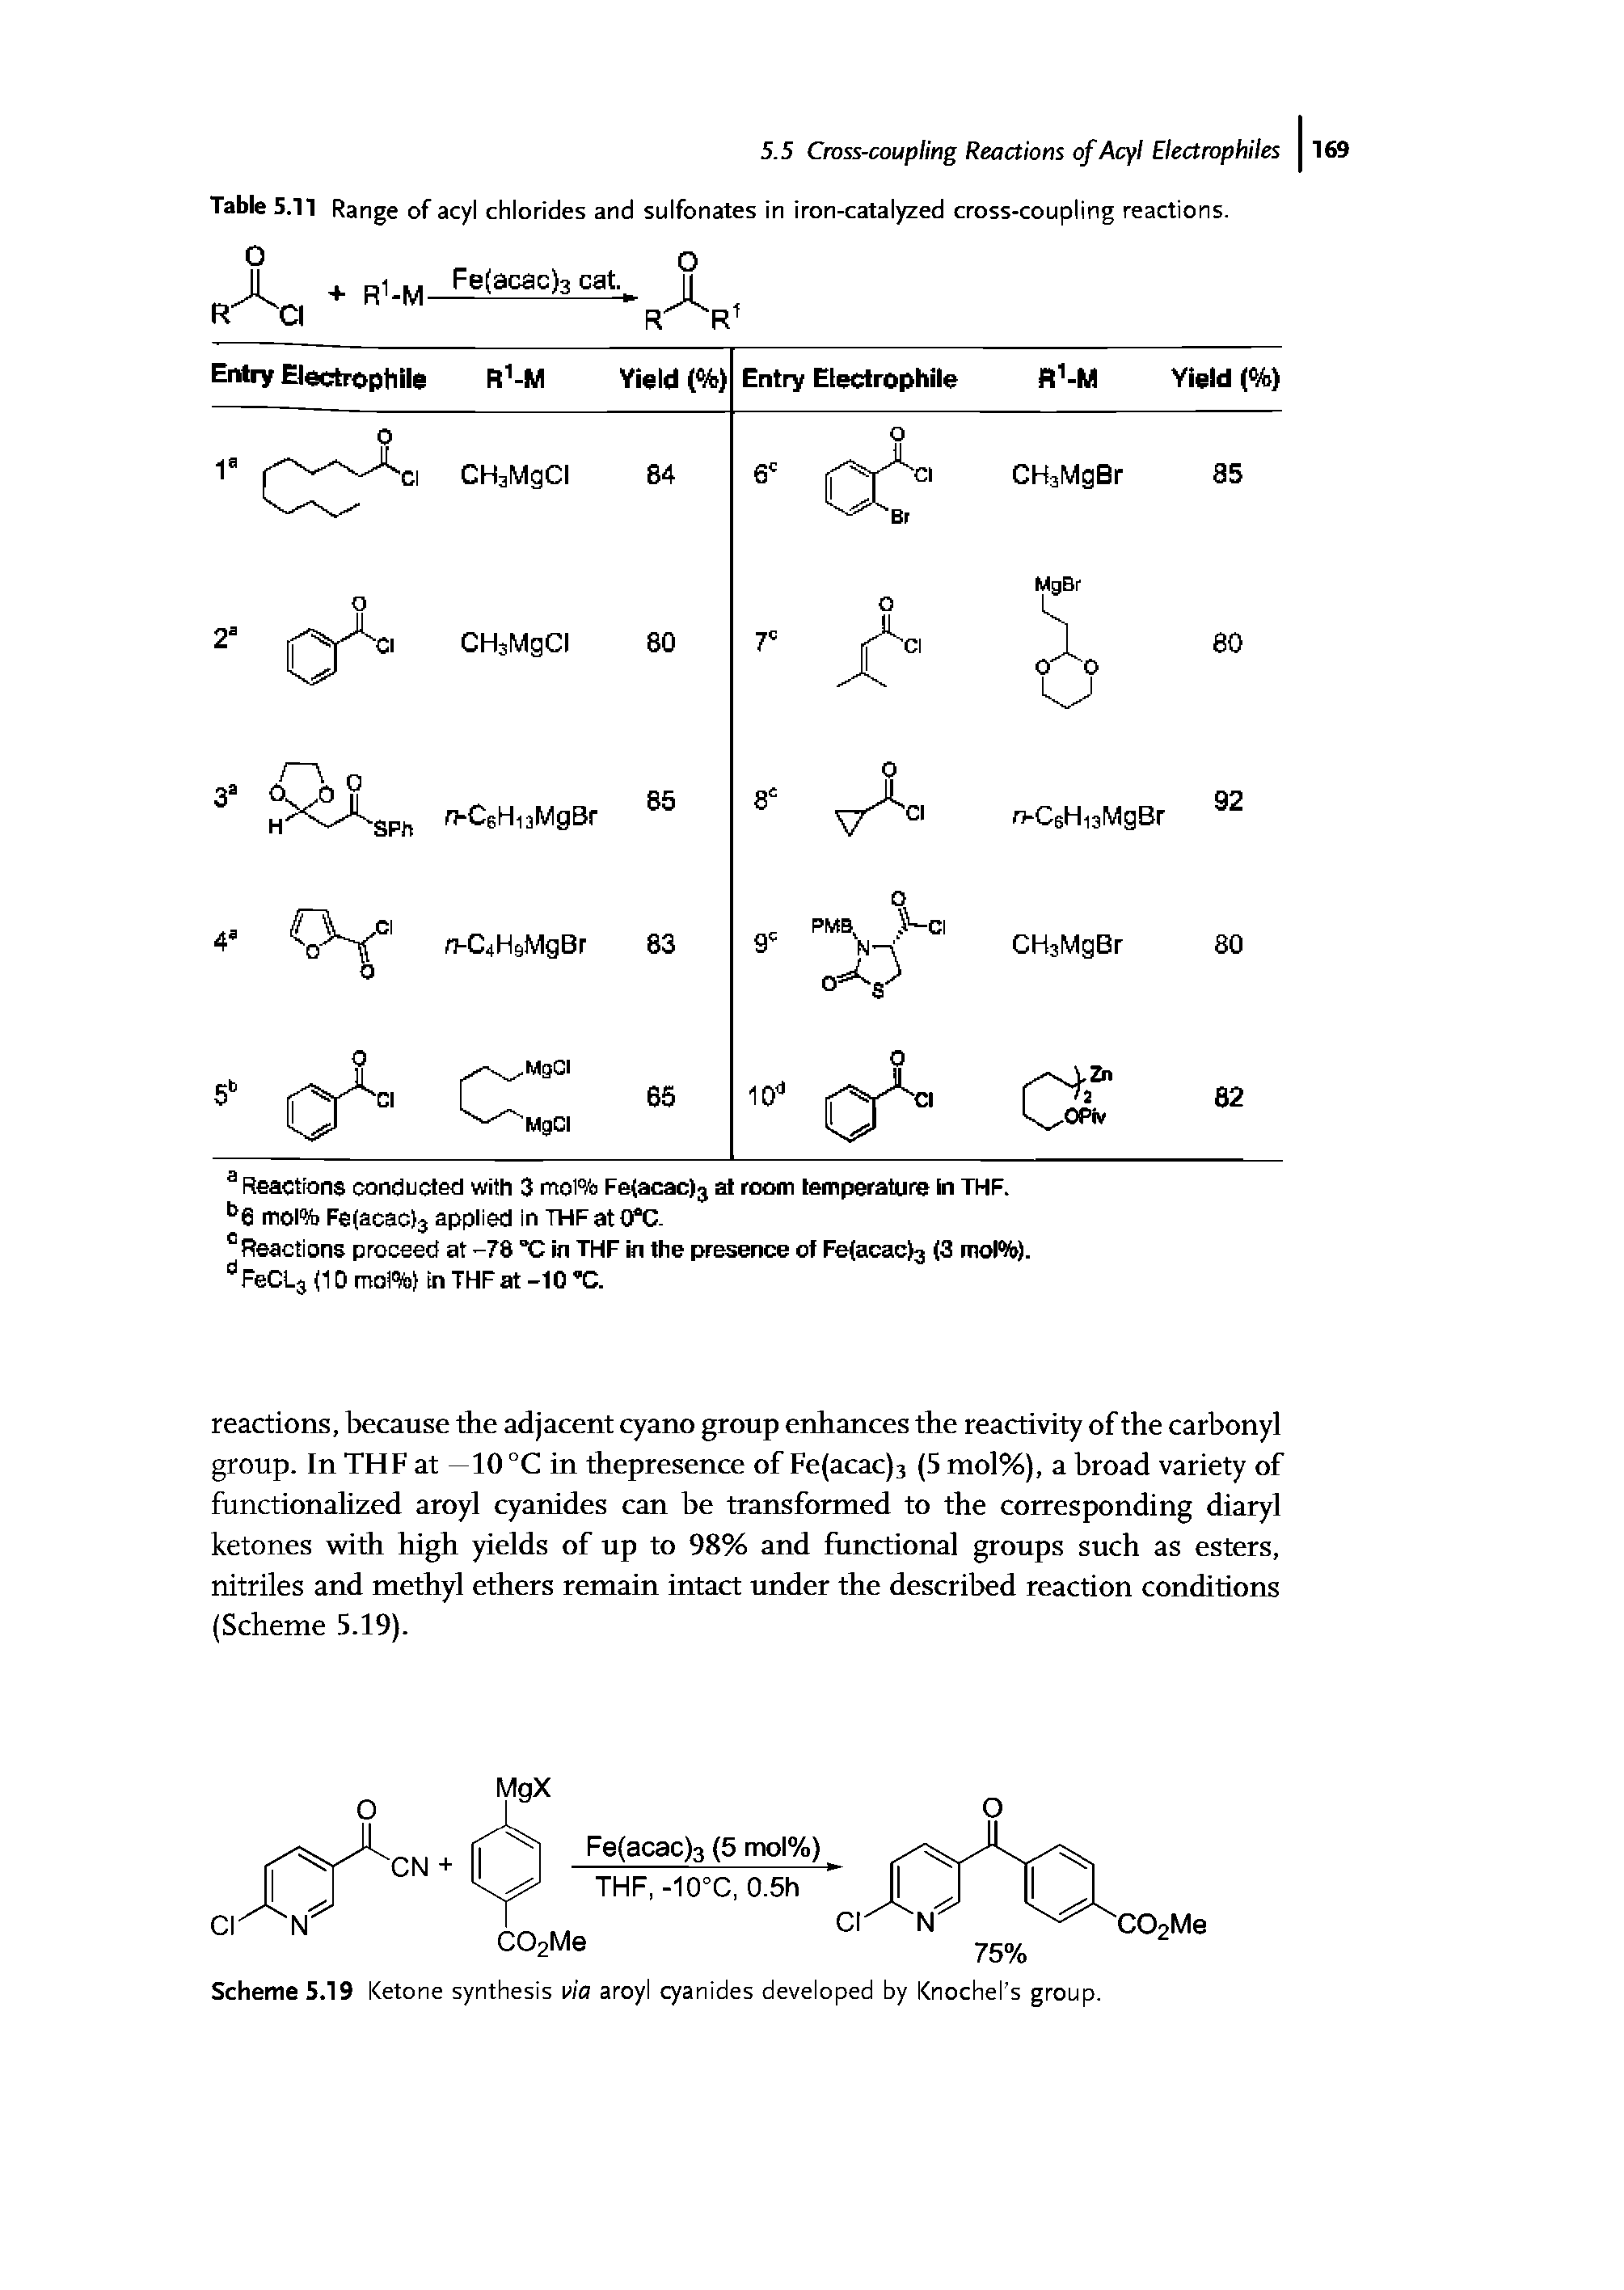 Table 5.11 Range of acyl chlorides and sulfonates in iron-catalyzed cross-coupling reactions.